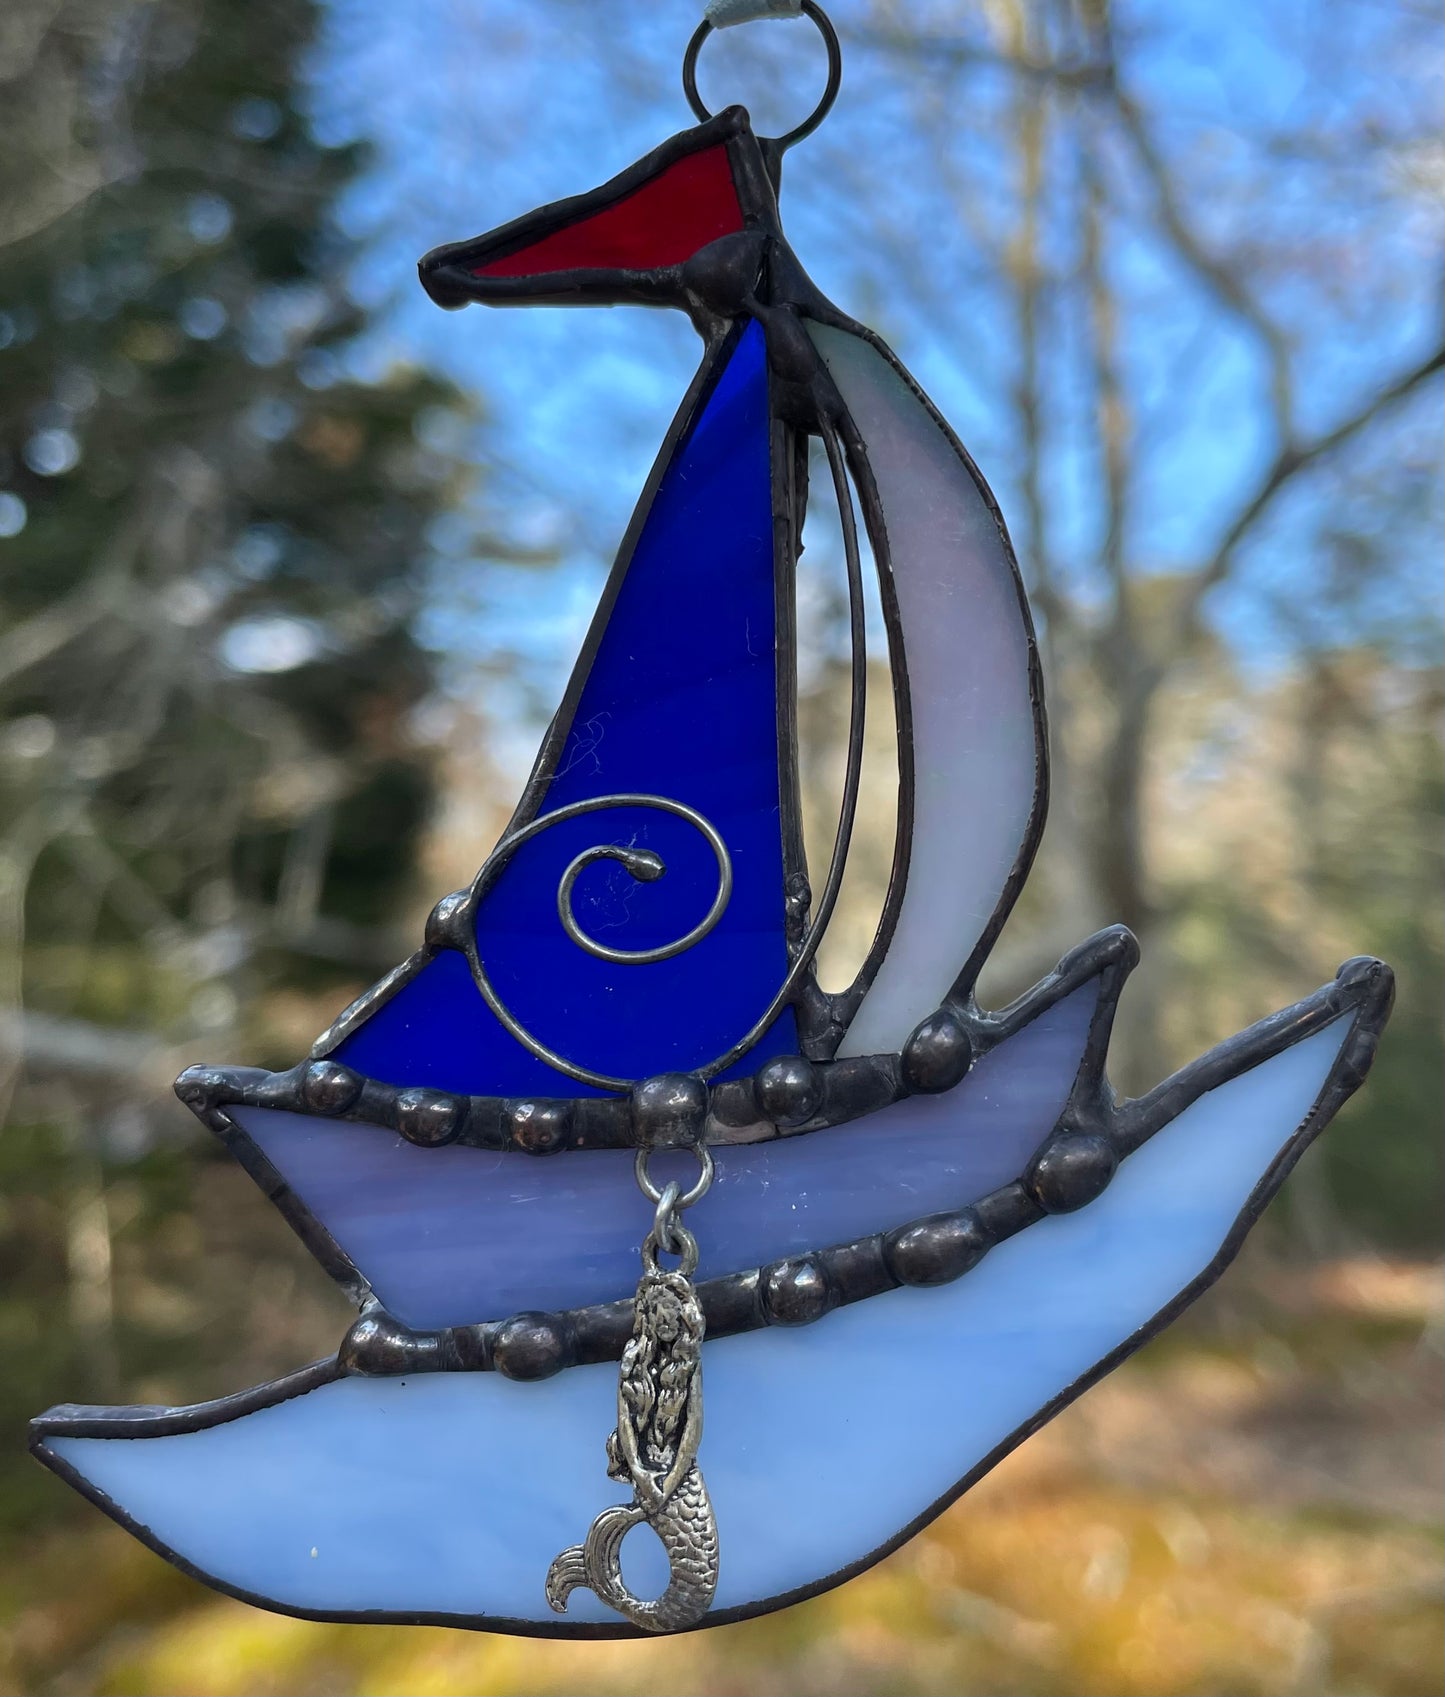 Her Ship Came In - Sailboat & Mermaid Charm